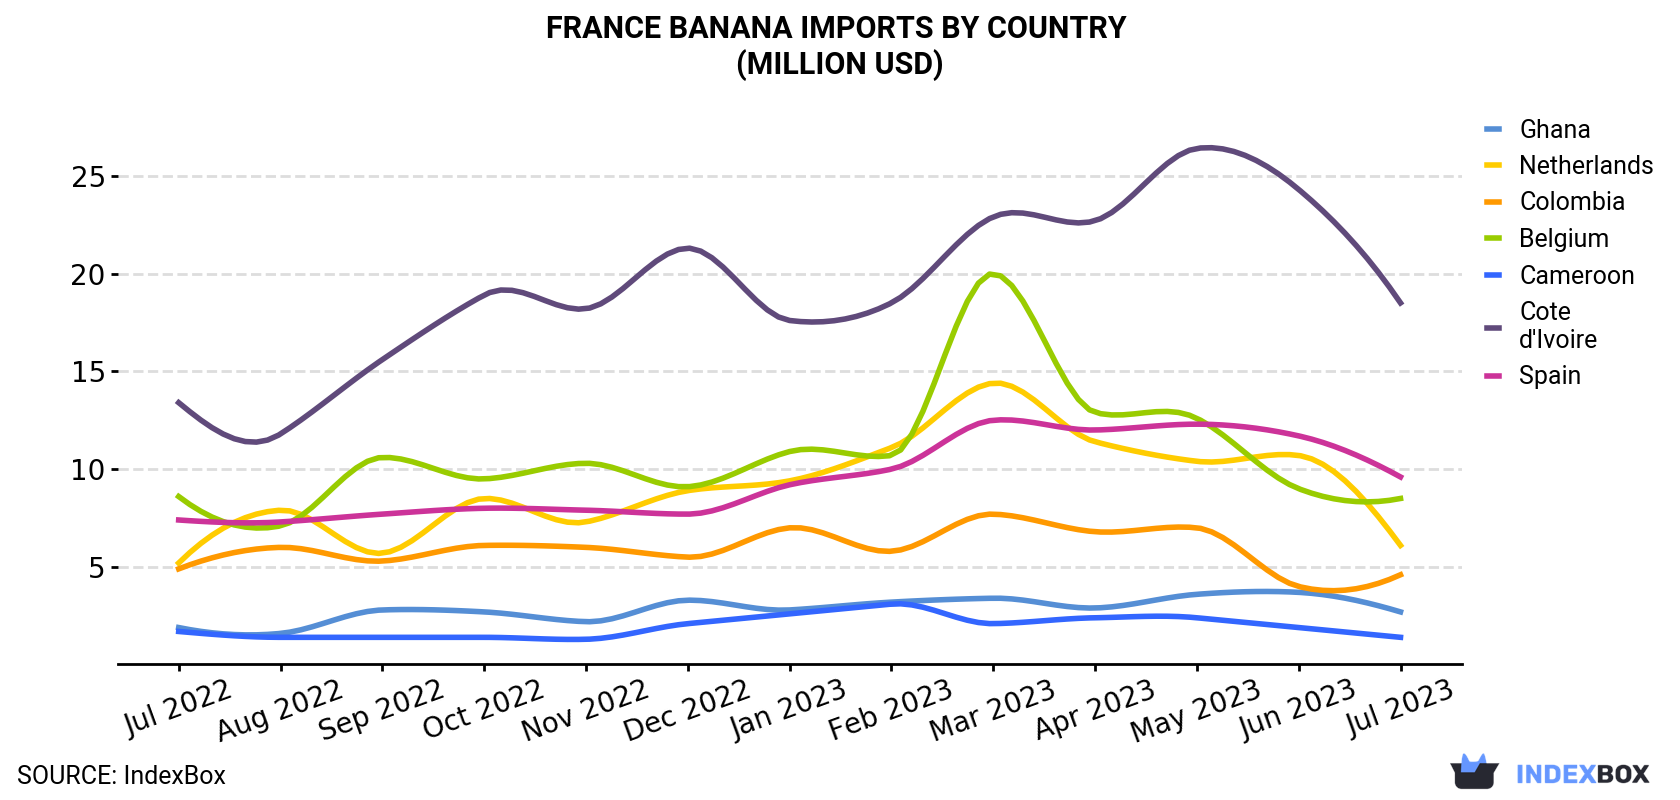 France Banana Imports By Country (Million USD)